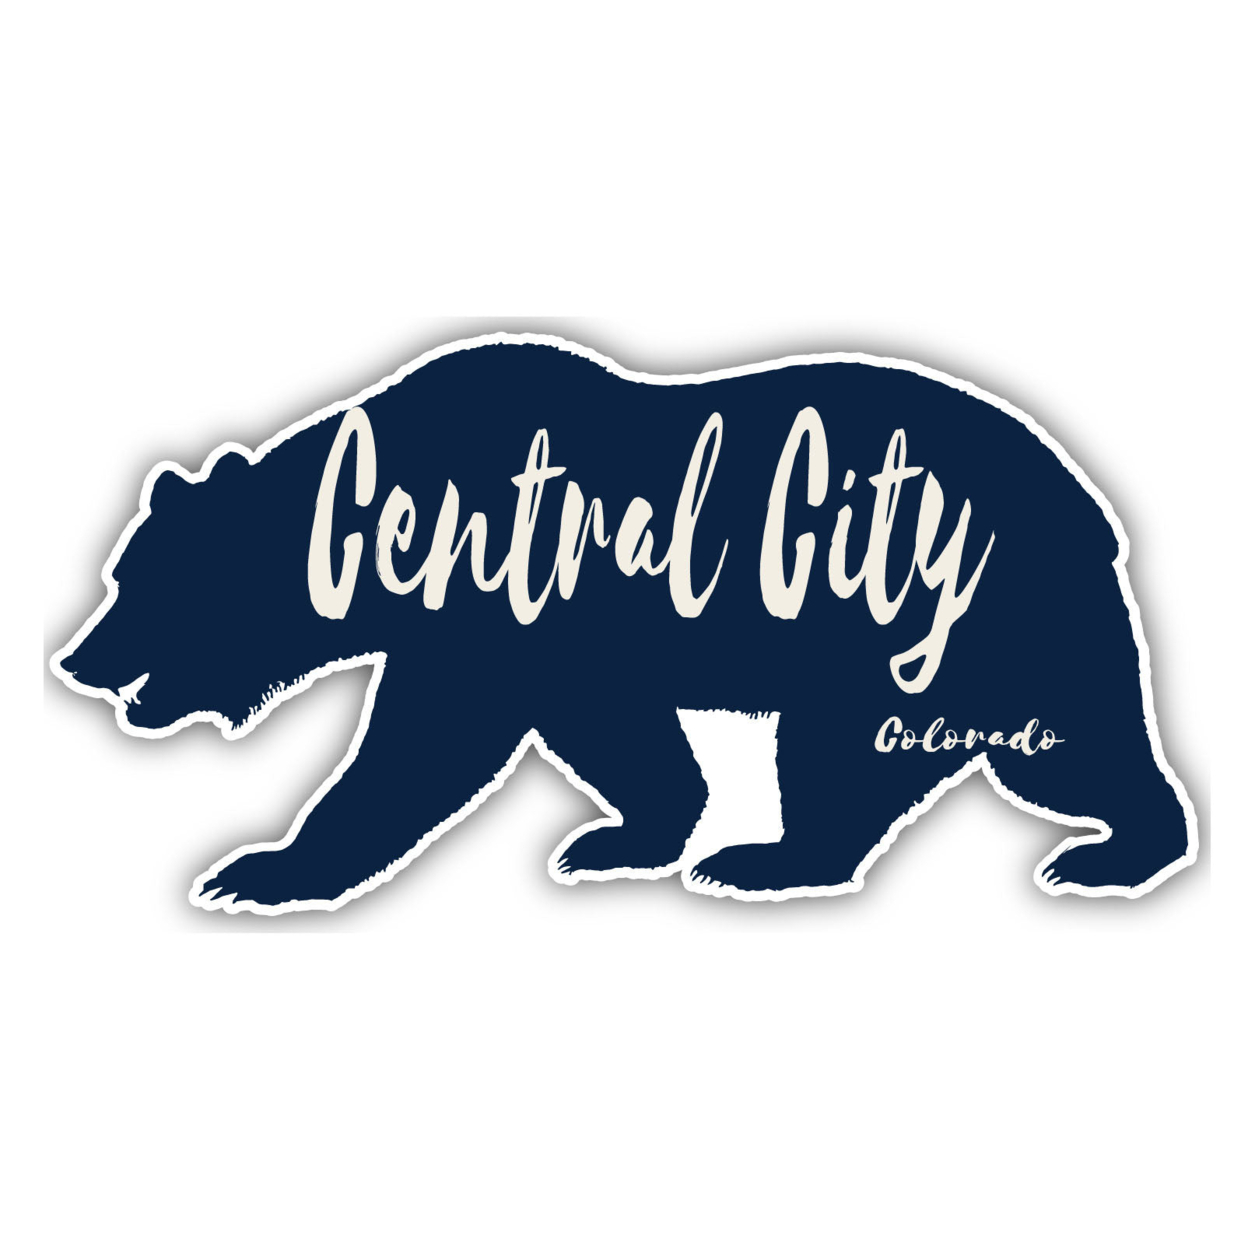 Central City Colorado Souvenir Decorative Stickers (Choose Theme And Size) - 4-Pack, 12-Inch, Bear